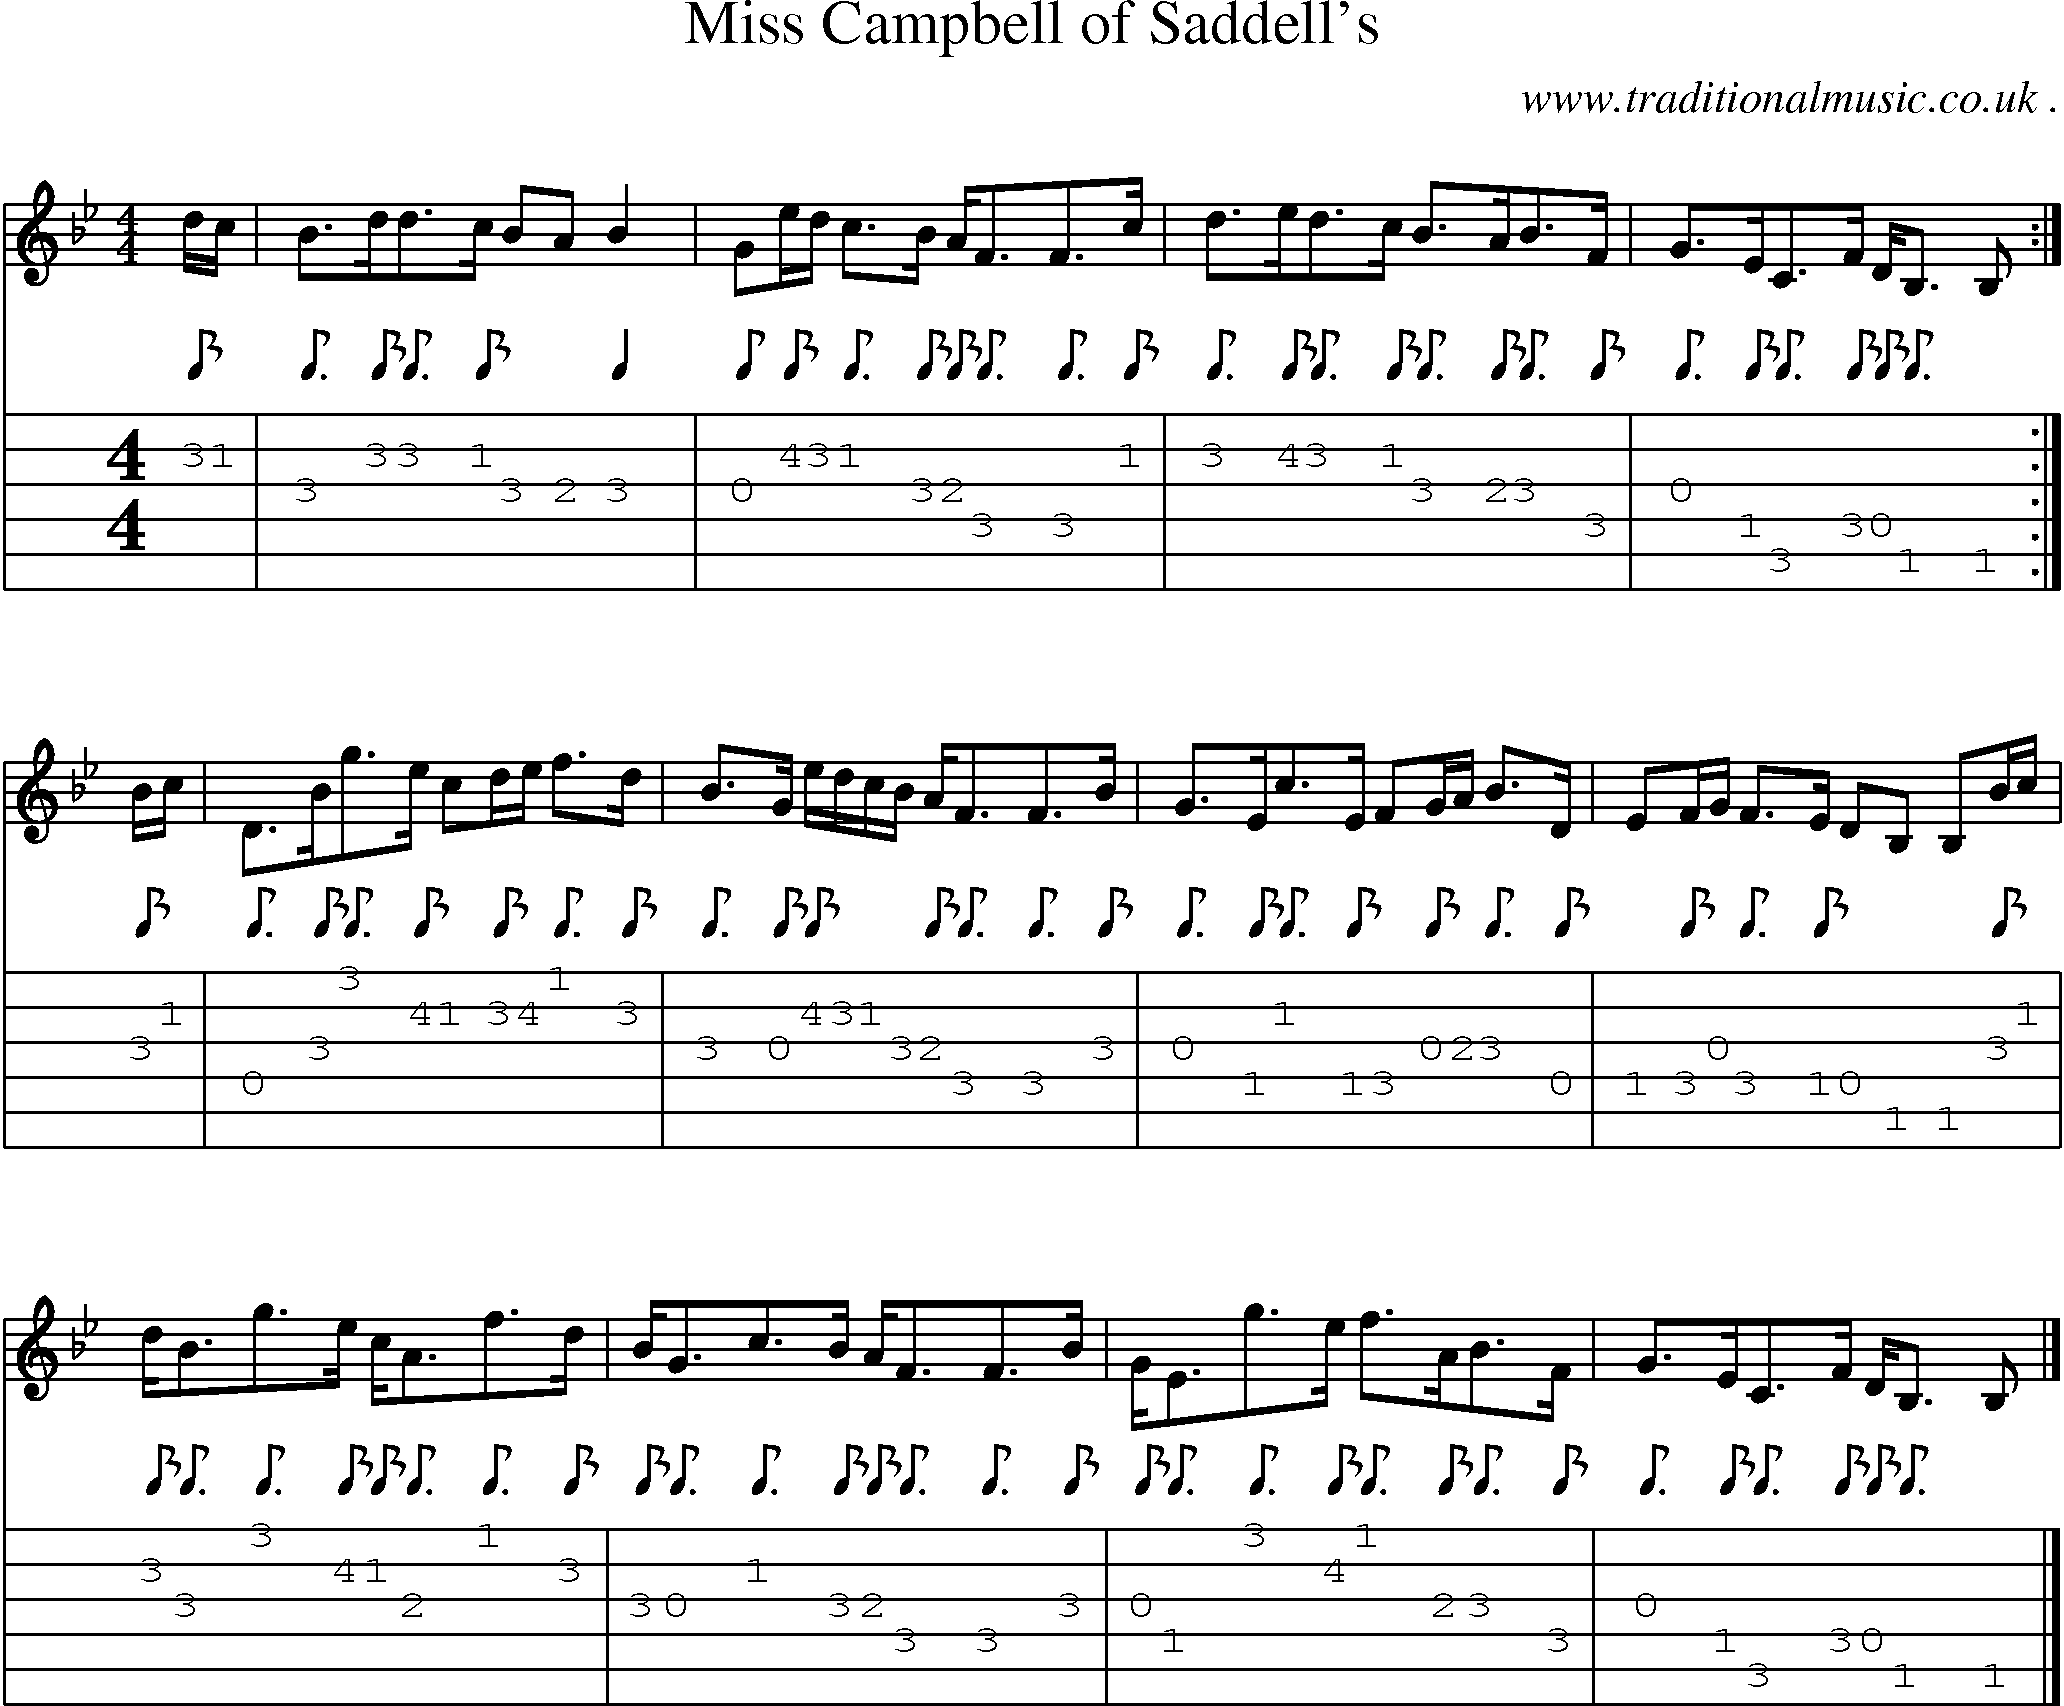 Sheet-music  score, Chords and Guitar Tabs for Miss Campbell Of Saddells